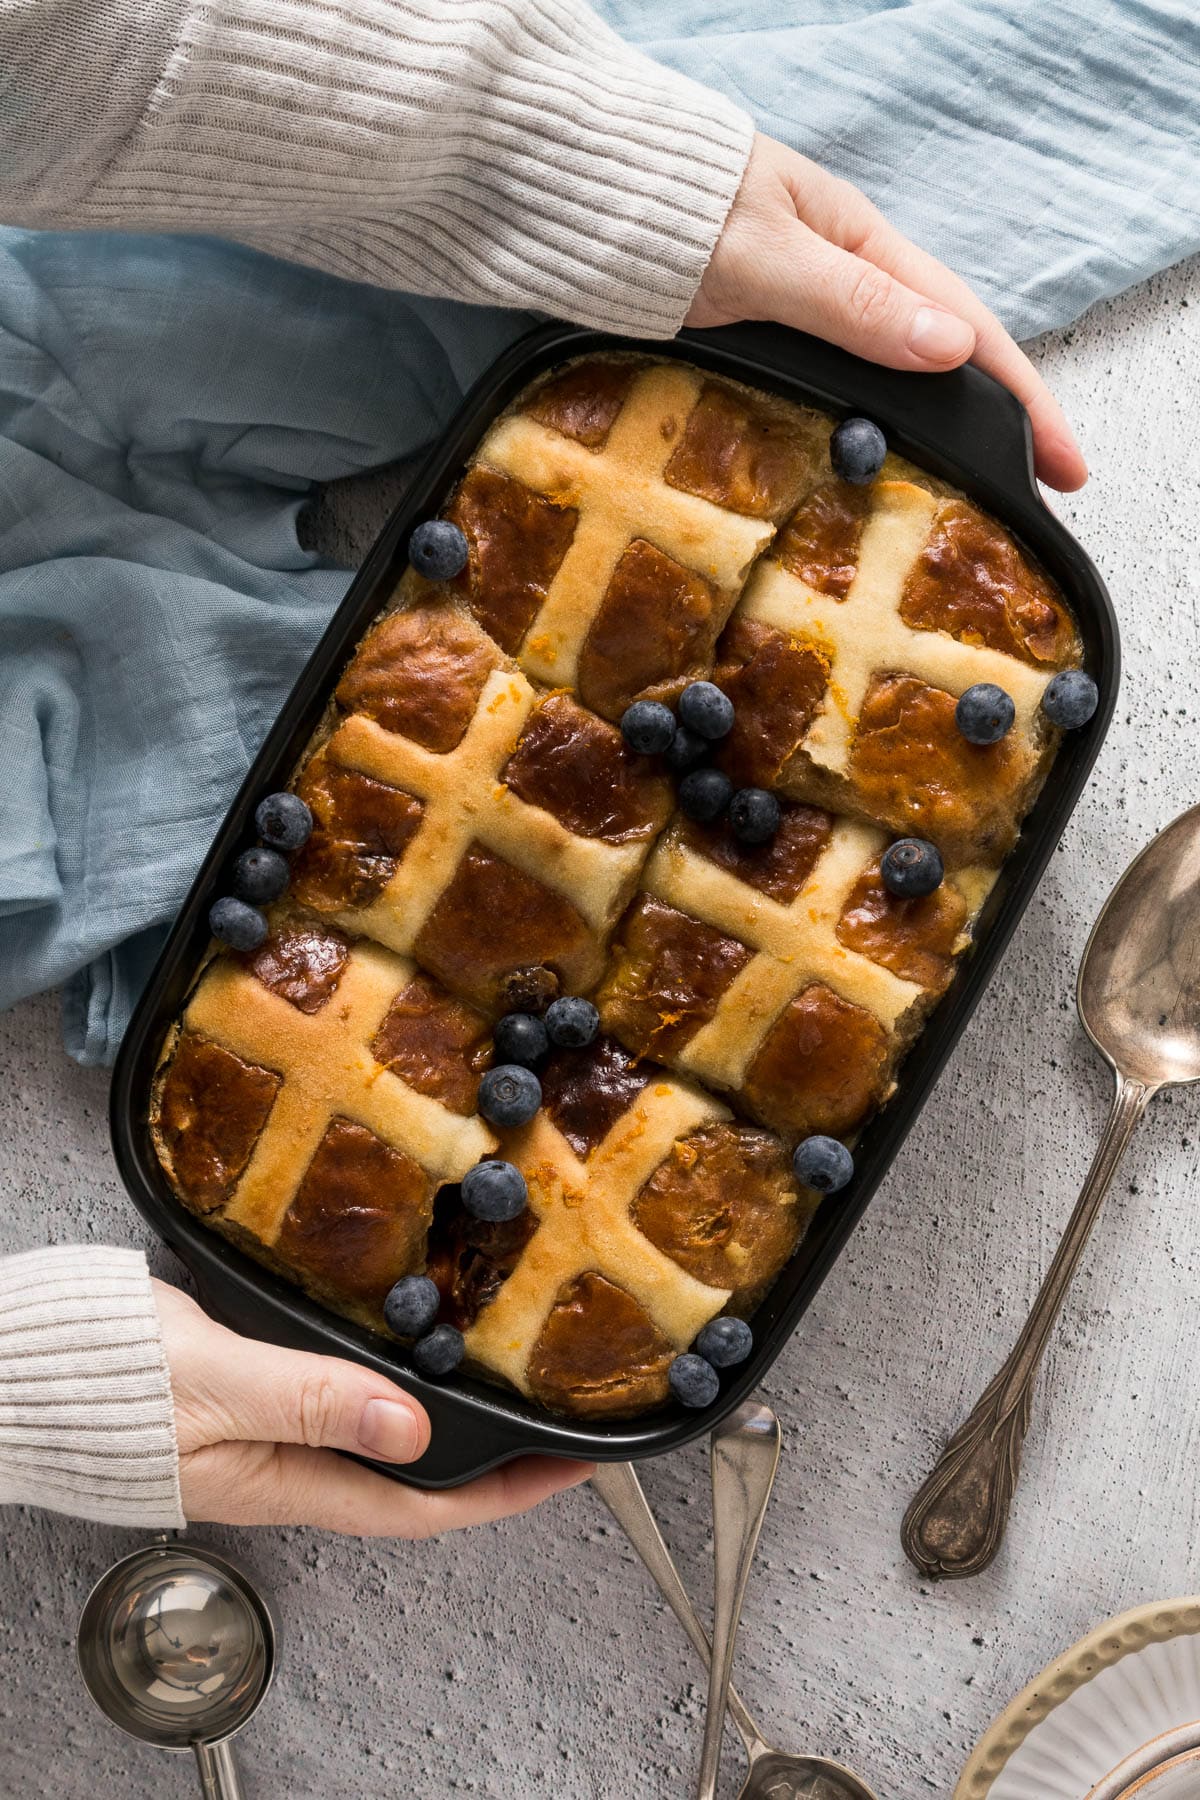 Top down view of hands placing the hot cross bun pudding on the counter.